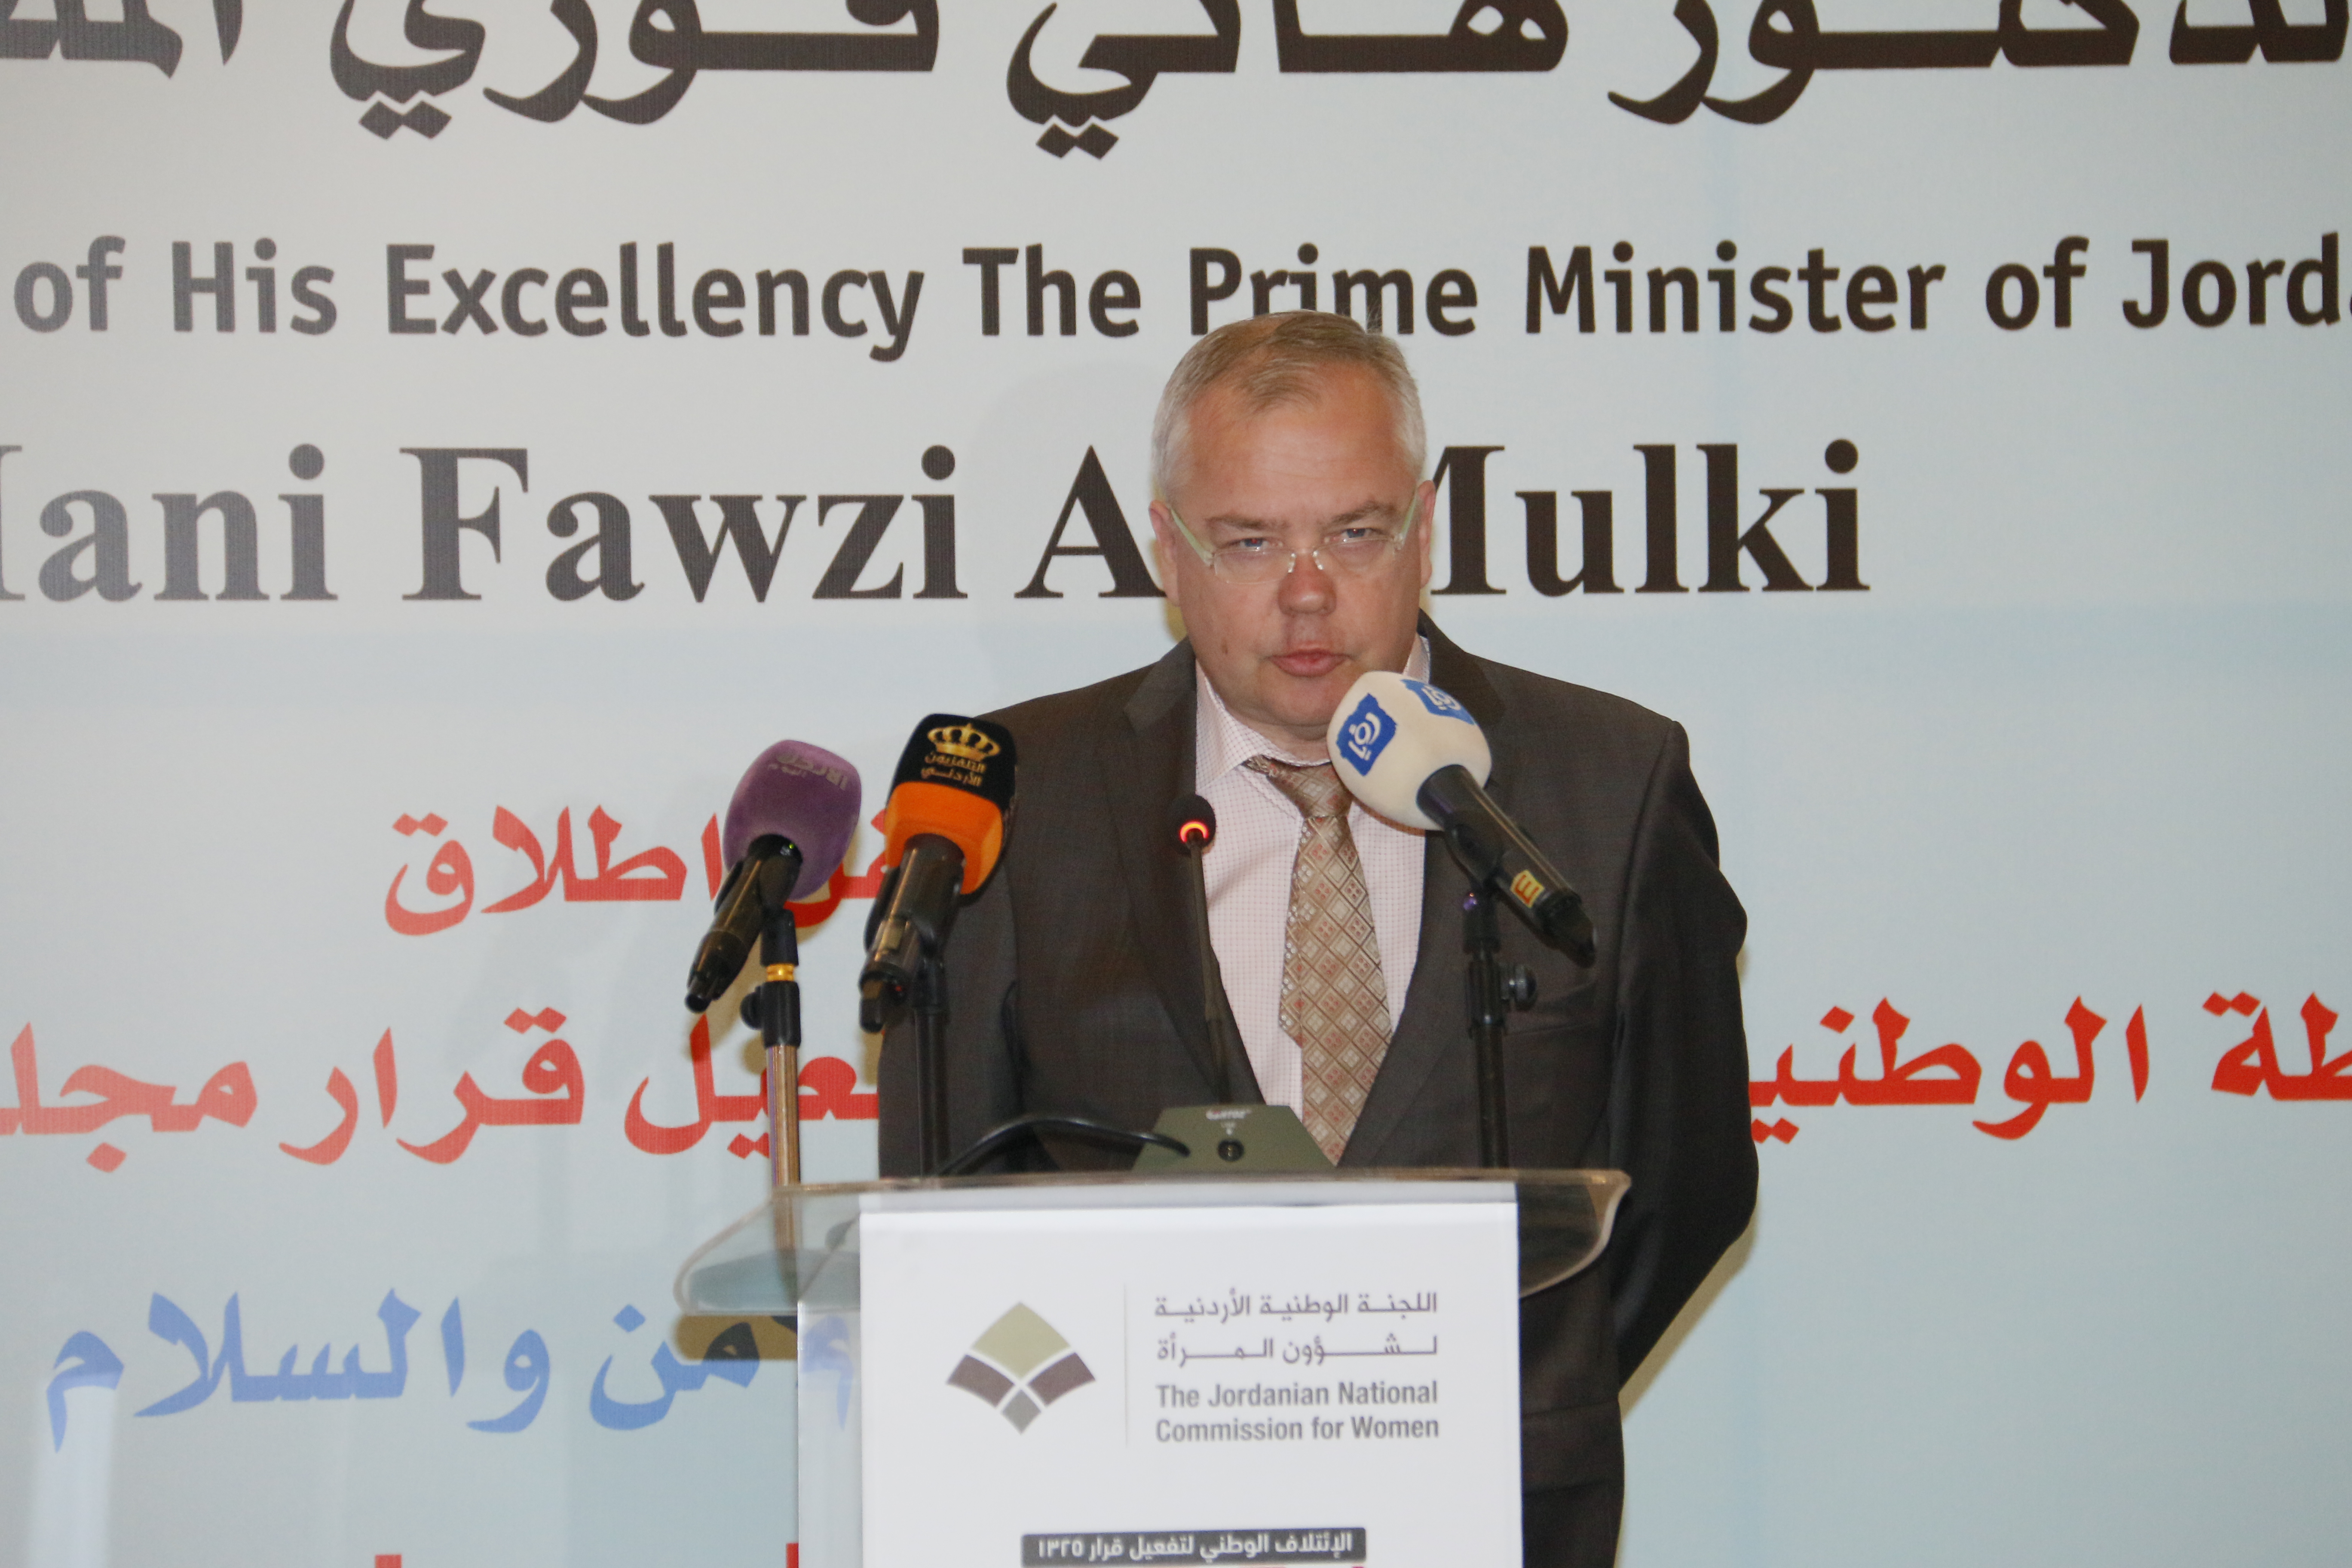 The Ambassador of the Republic of Finland to Lebanon and Jordan, H.E Mr. Matti Lassila addresses the audience of the event during the opening remarks of the ceremony. 